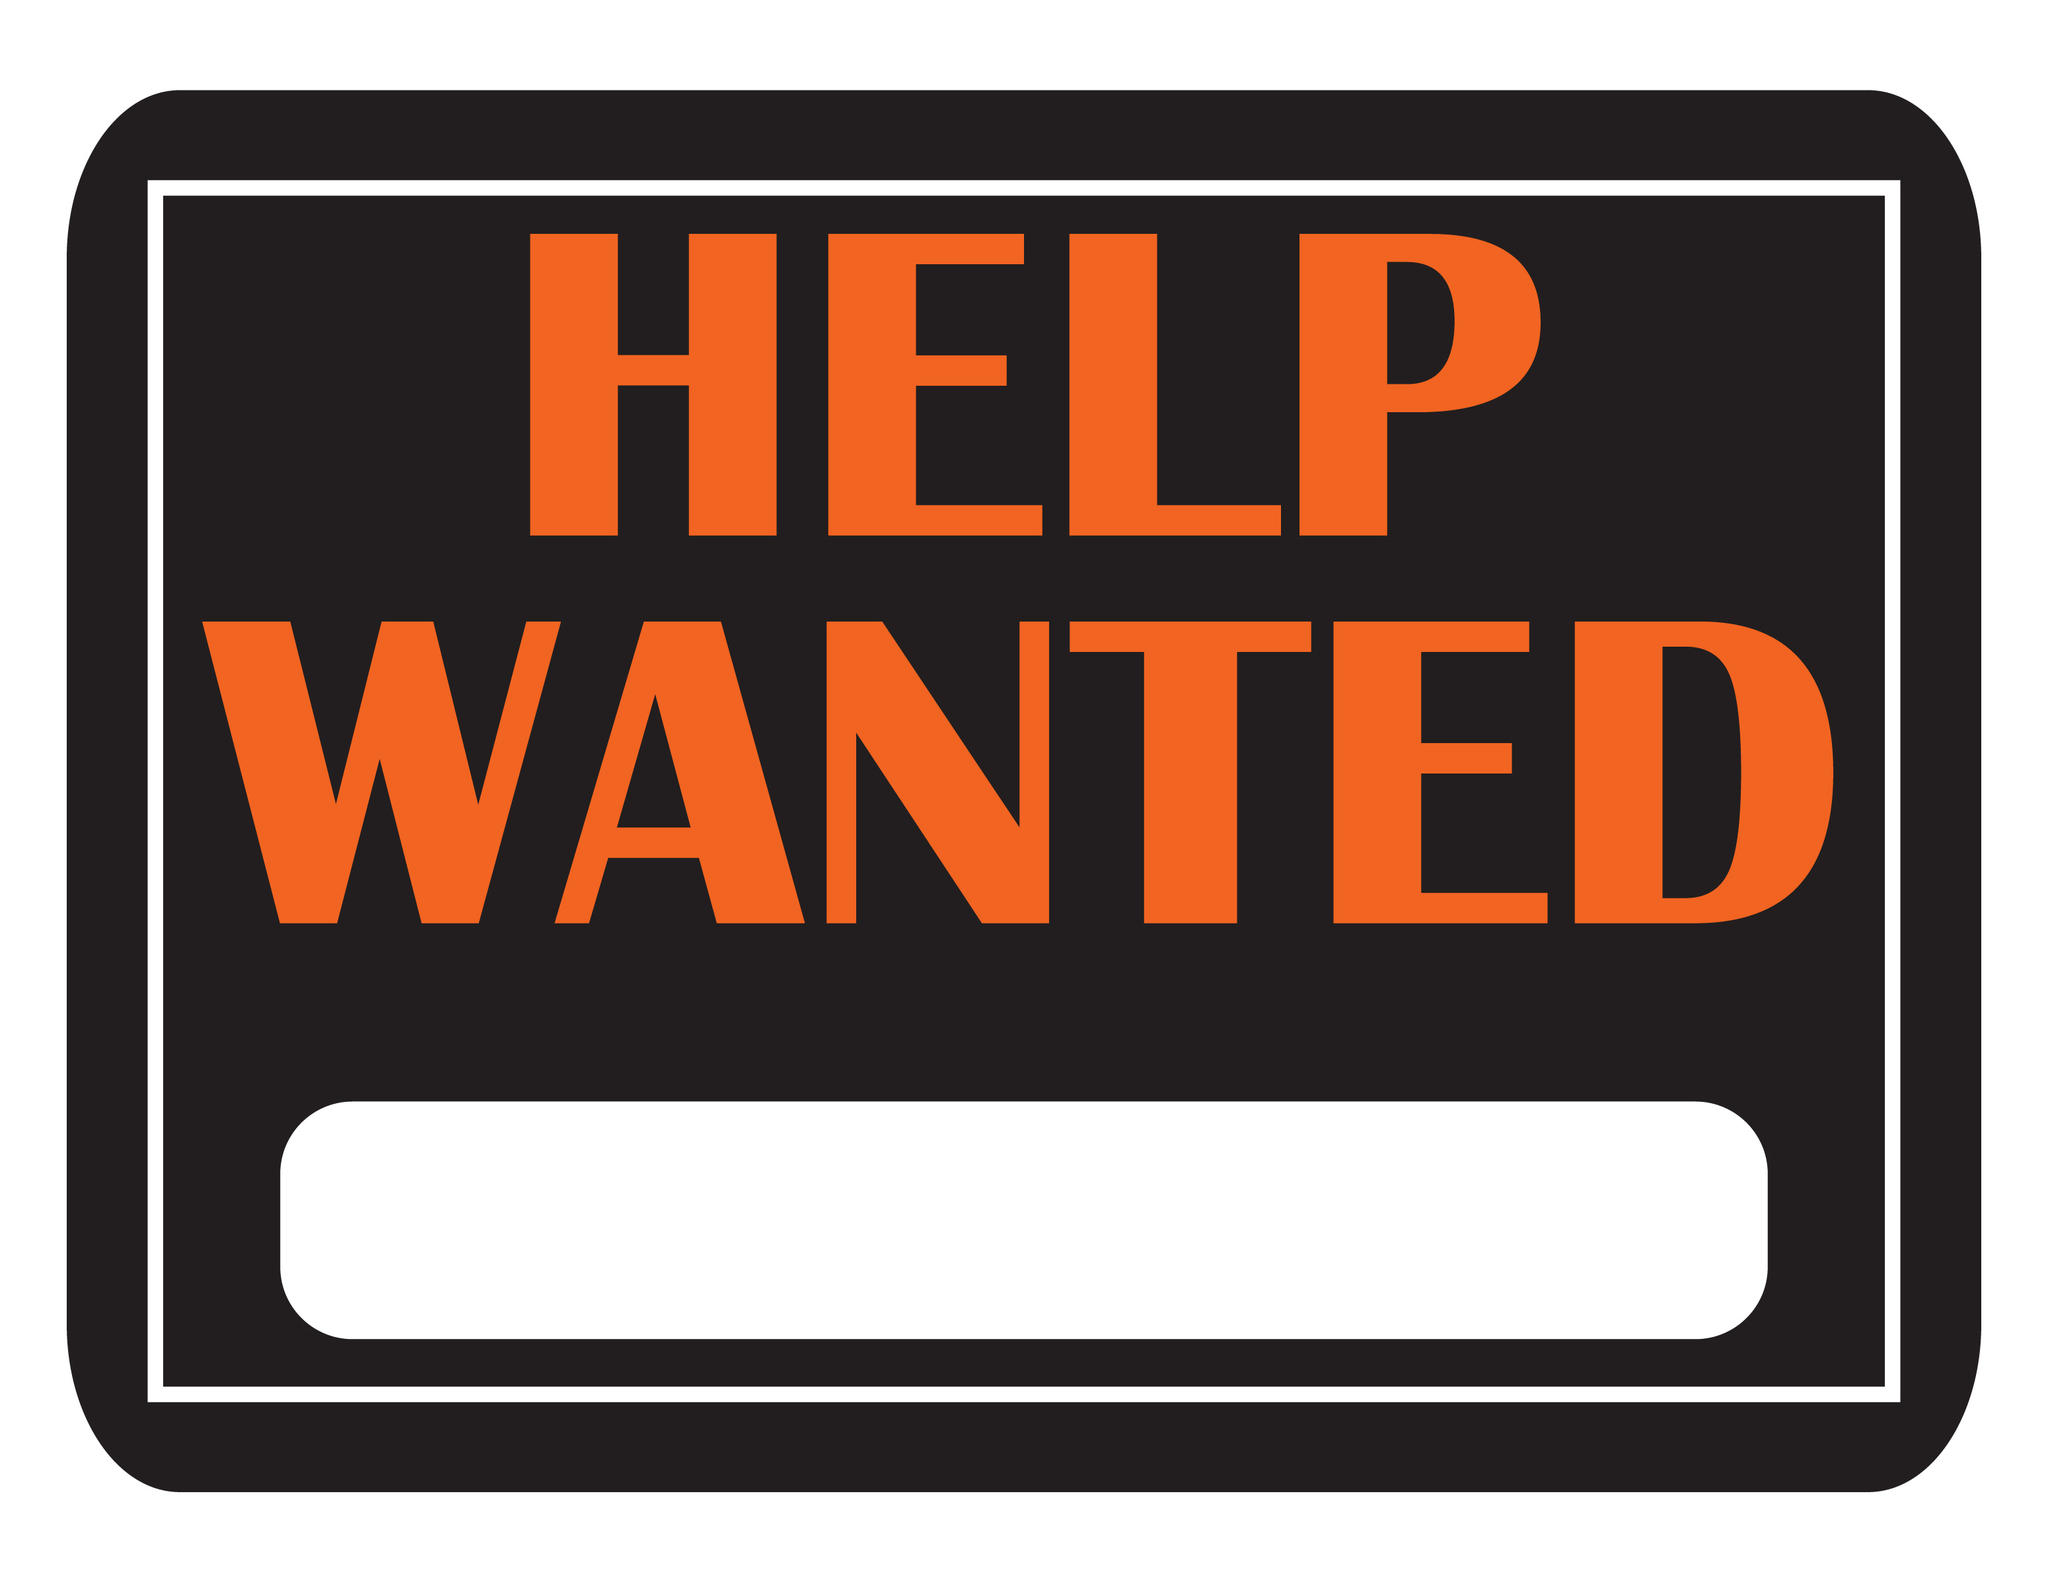 Help Wanted SIgn Clipart u002 - Help Wanted Clip Art